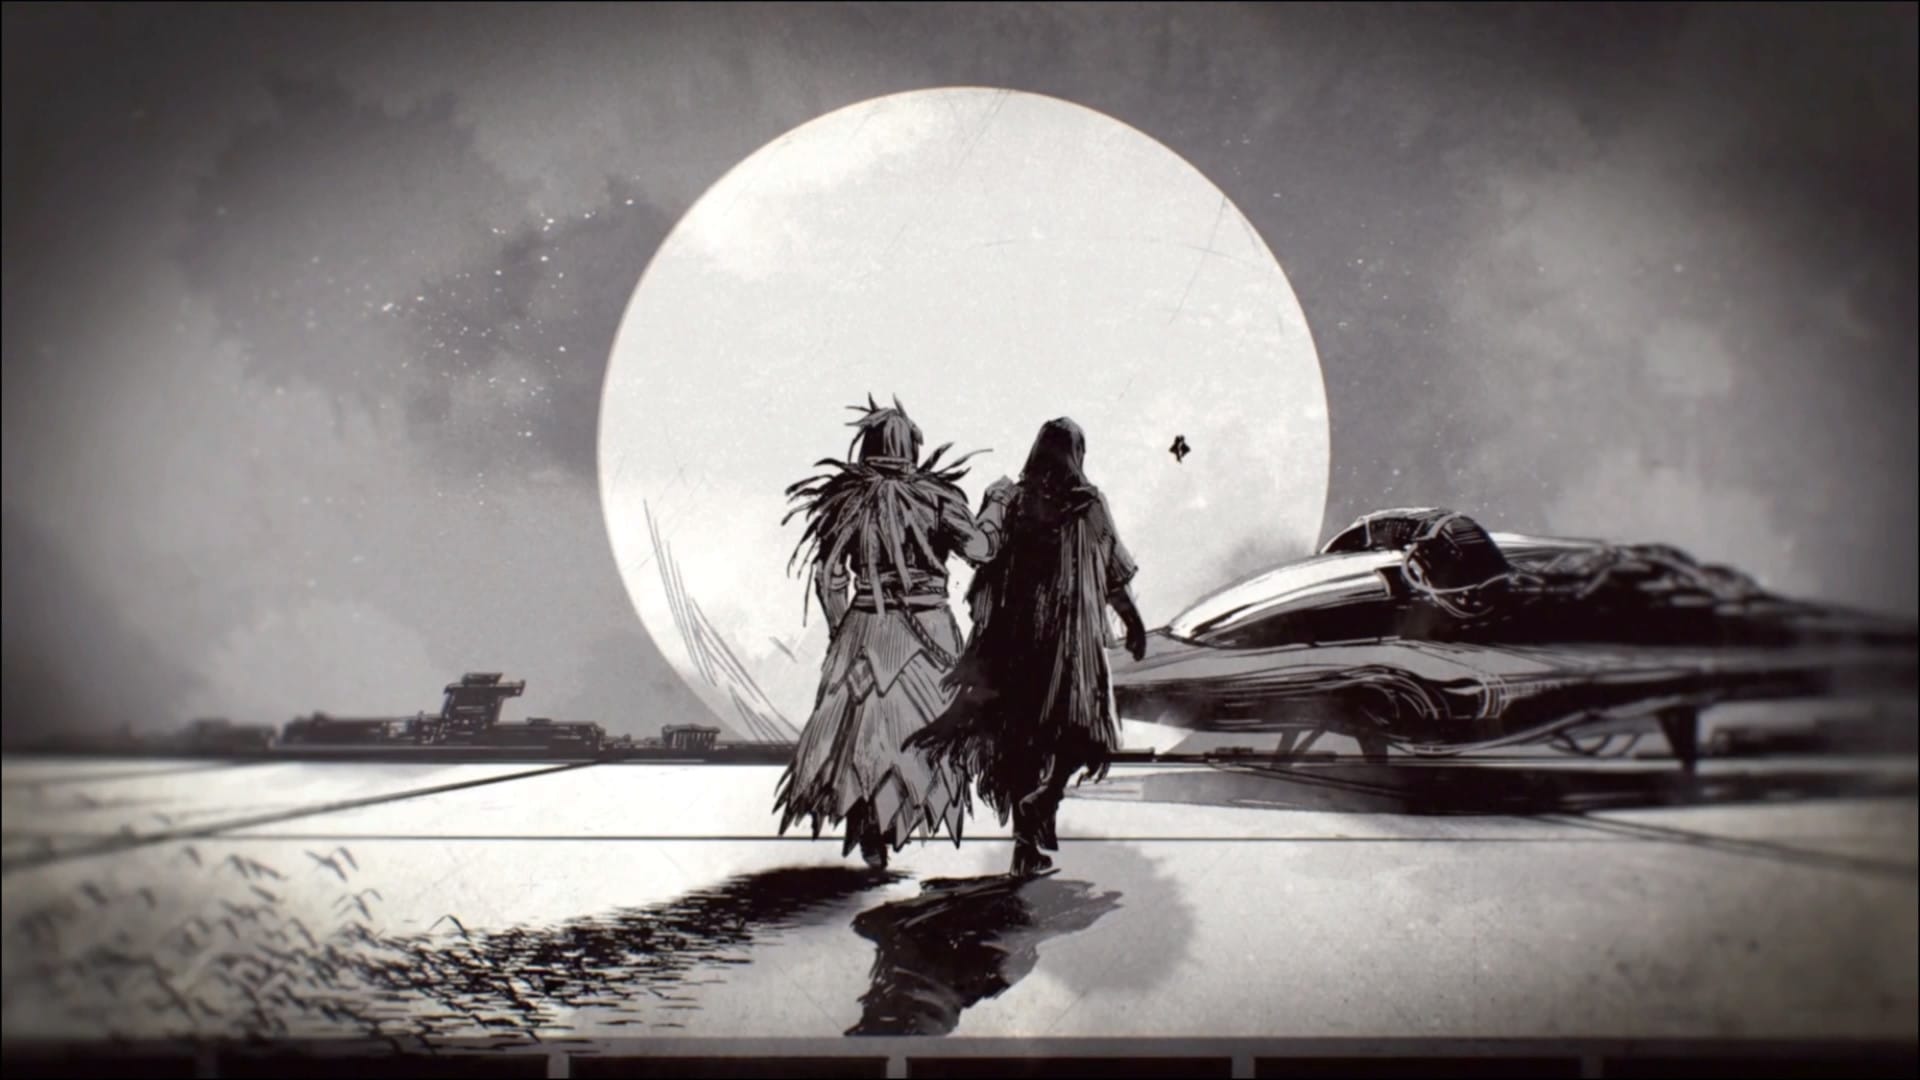 A black and white image of two Guardians walking together